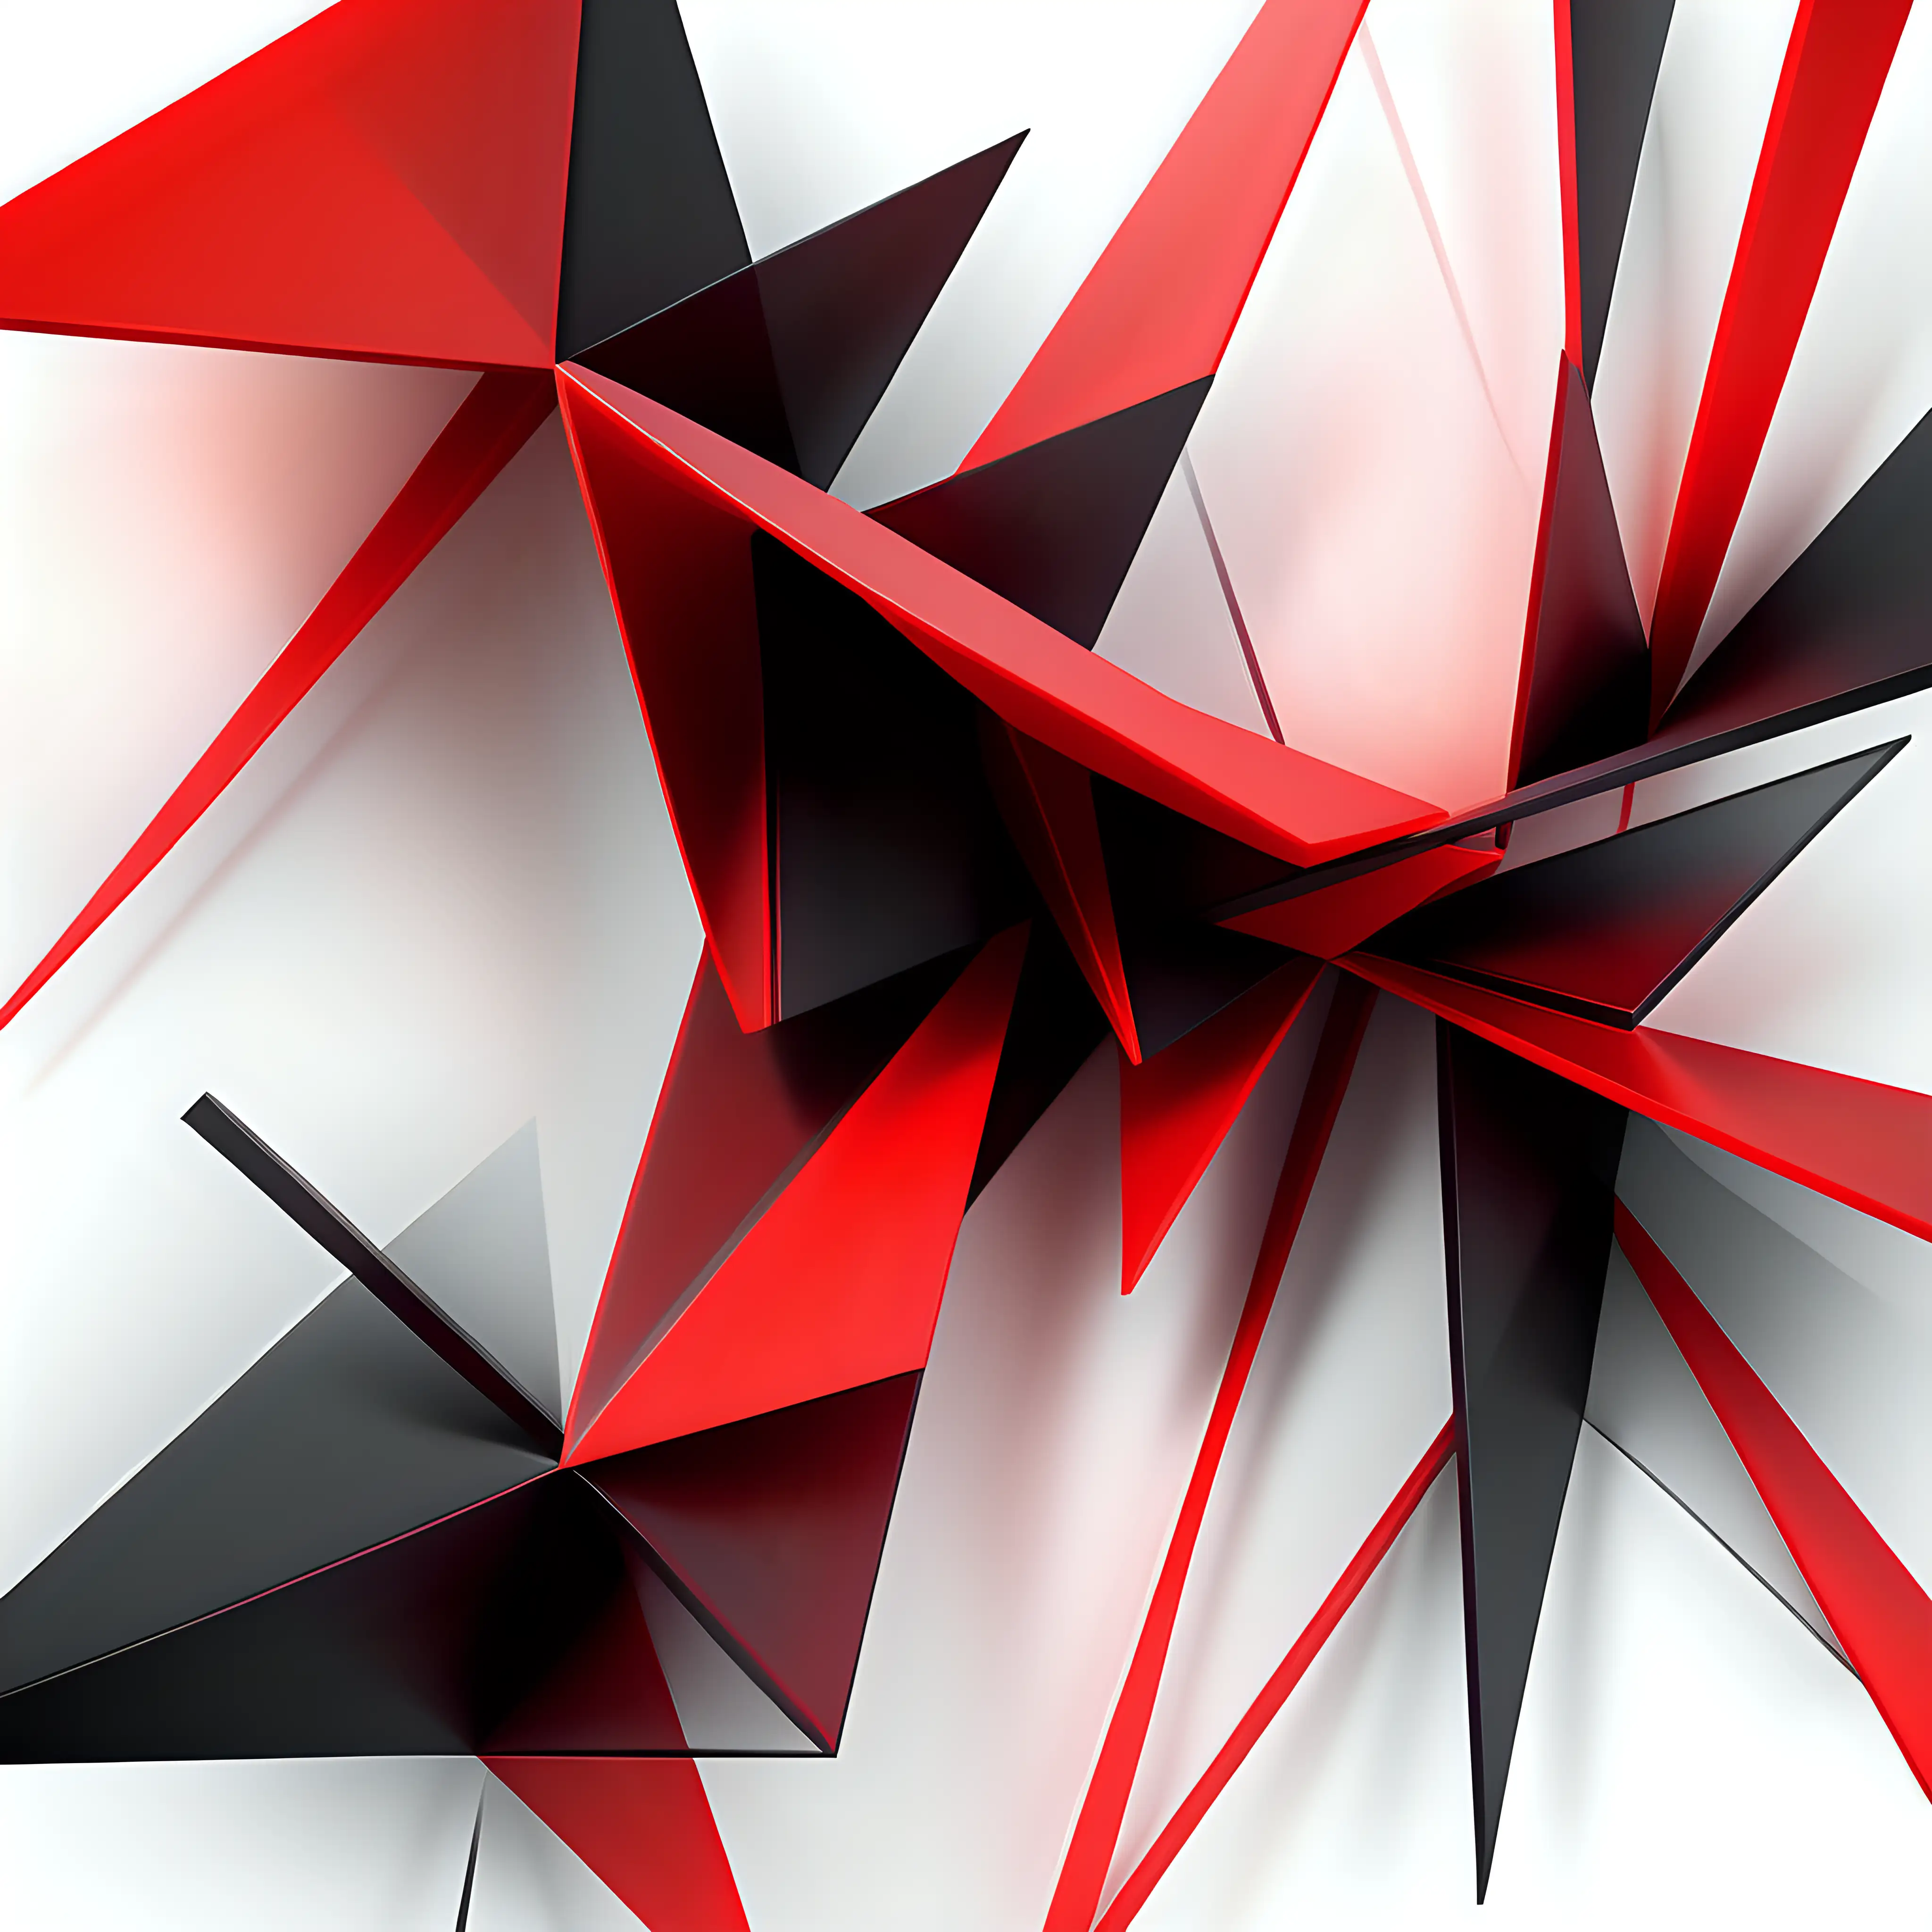 Vibrant Abstract Geometric Figures Glowing Black White and Red on a White Background